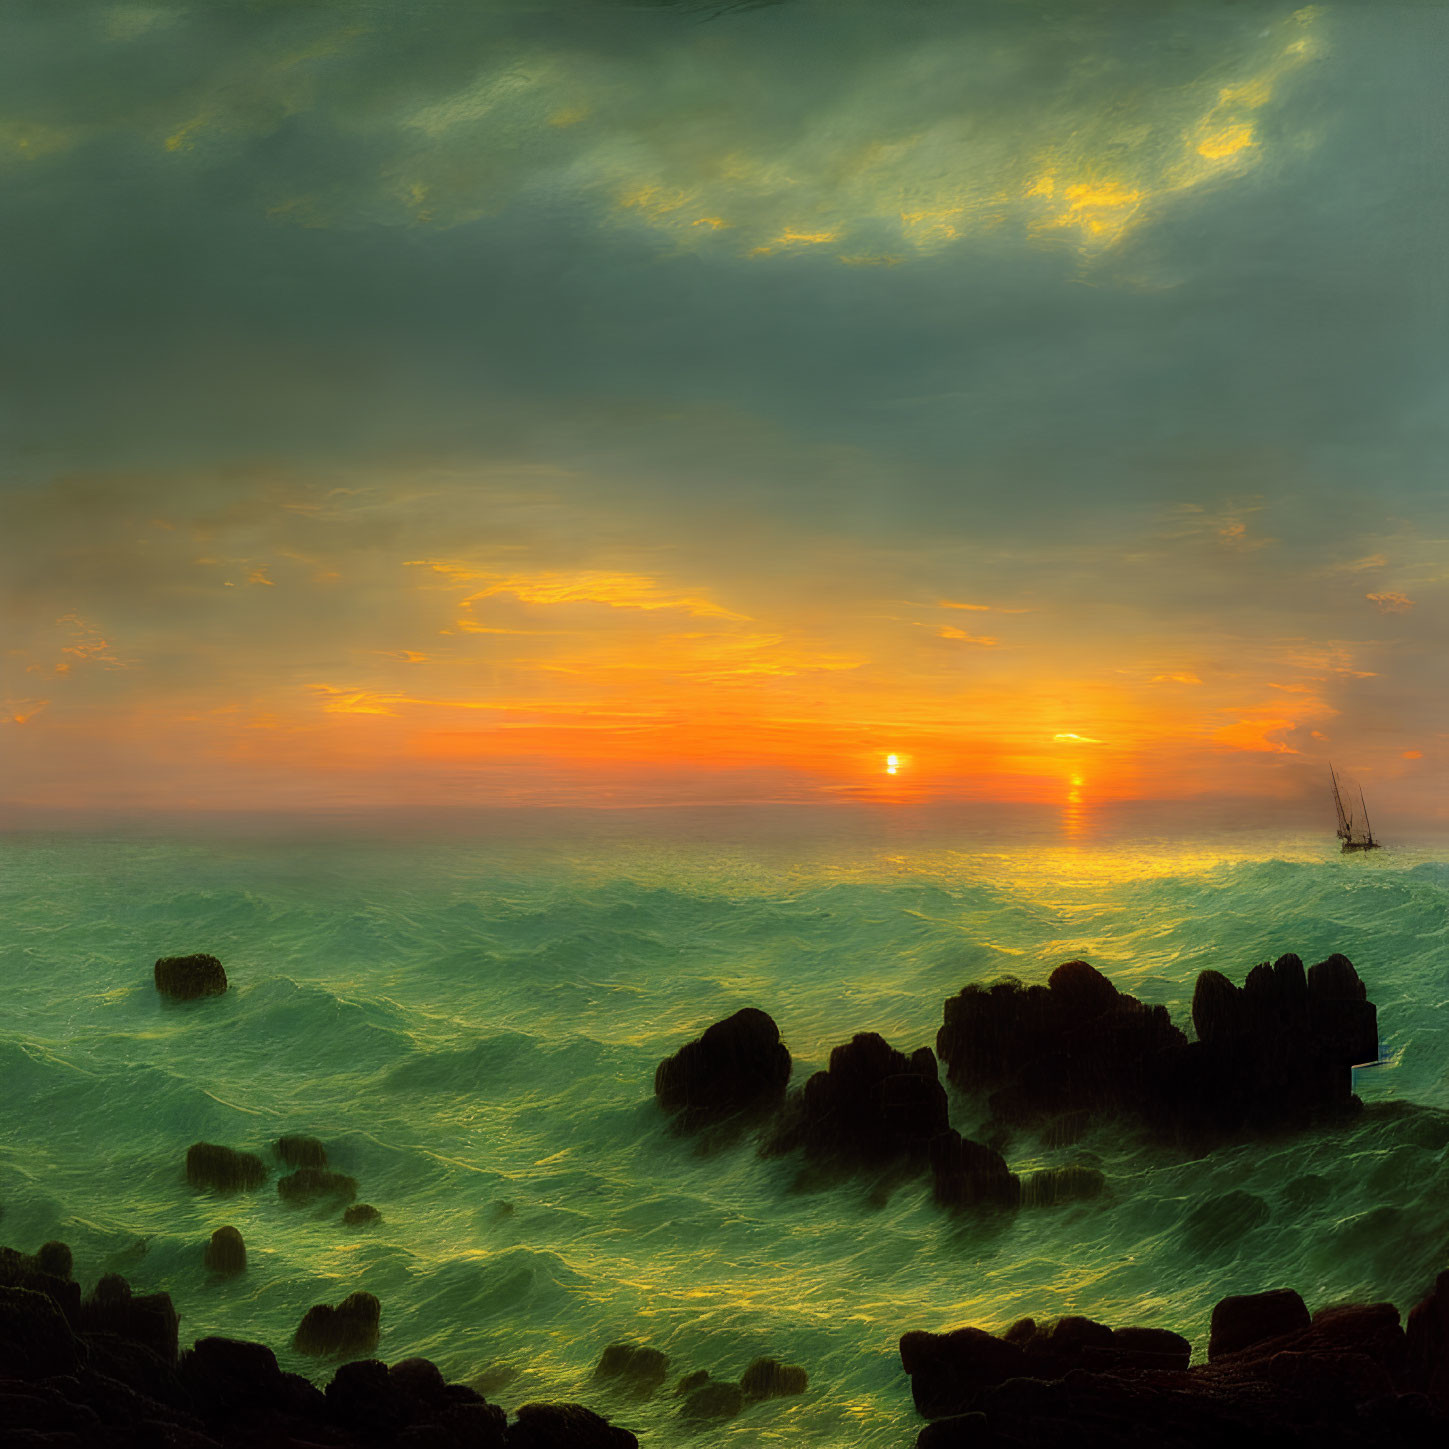 Scenic sunset over turbulent sea with sailboat, highlighted clouds, and dark rocks